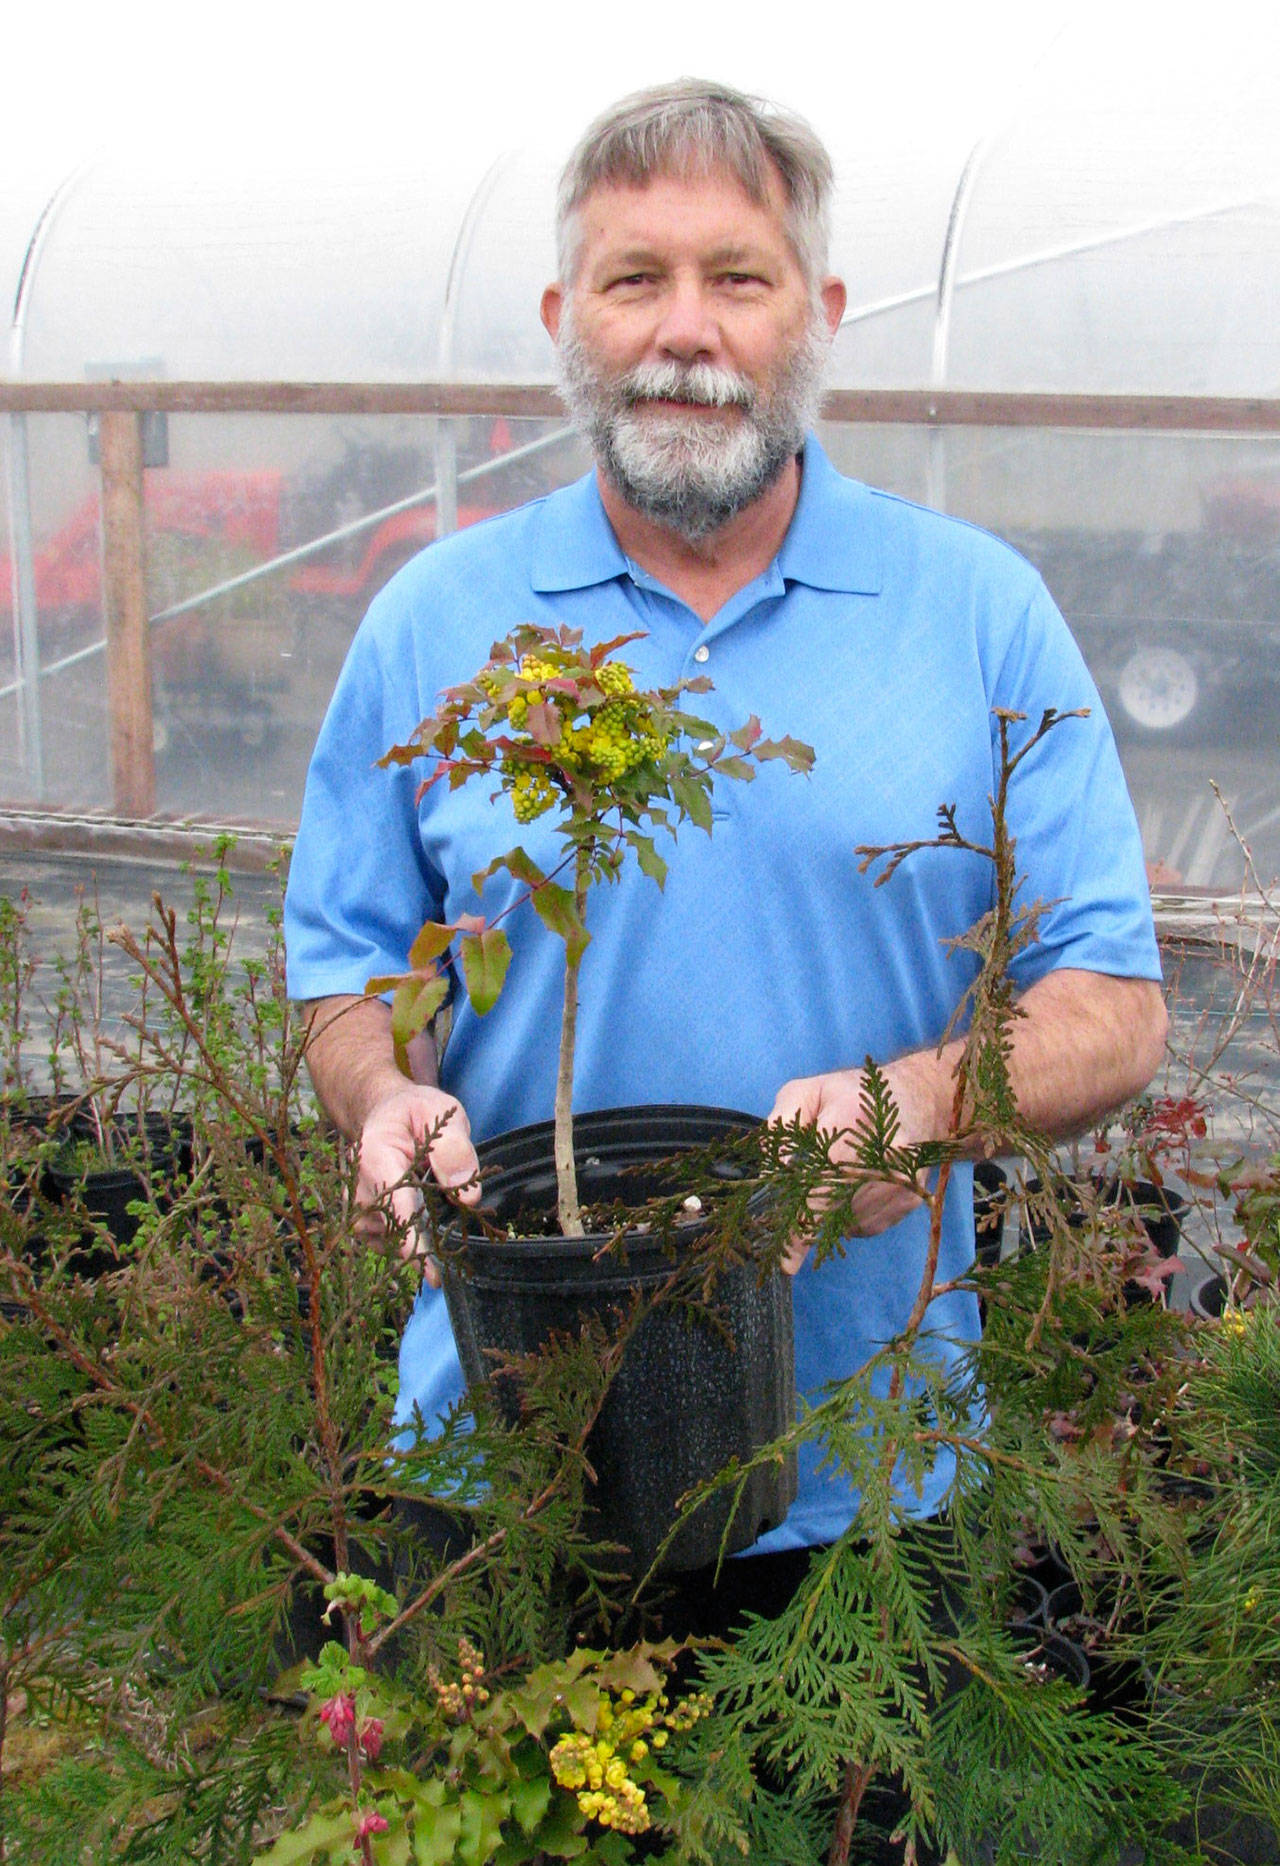 “Wildlife-friendly Landscapes Using Natives” will be presented by Master Gardener Mike Barnes at noon, Thursday, May 25, at the county commissioners meeting room of the Clallam County Courthouse, 223 E. Fourth St., Port Angeles. The presentation is part of the Green Thumb Garden Tips education series sponsored by the WSU Clallam County Master Gardeners on the second and fourth Thursday of each month. Photo by Amanda Rosenberg